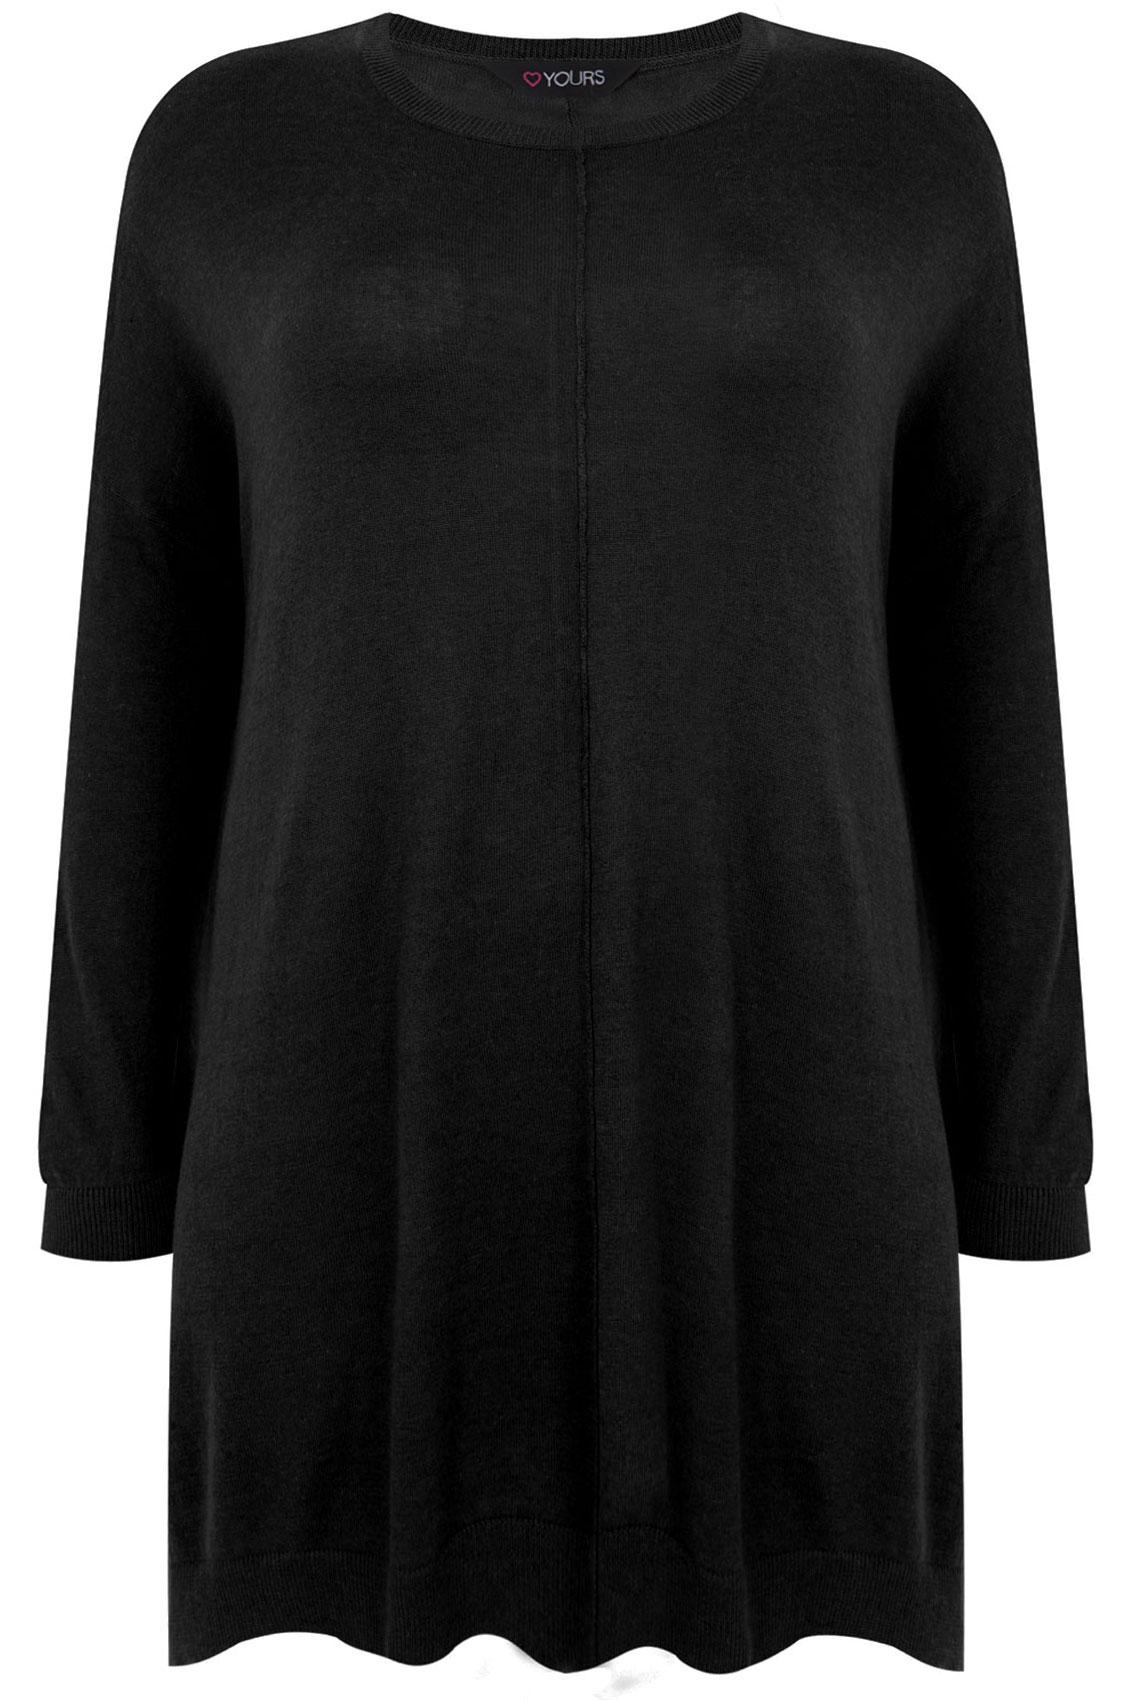 Black Longline Batwing Slouch Jumper With Side Slits Plus Size 14 to 32